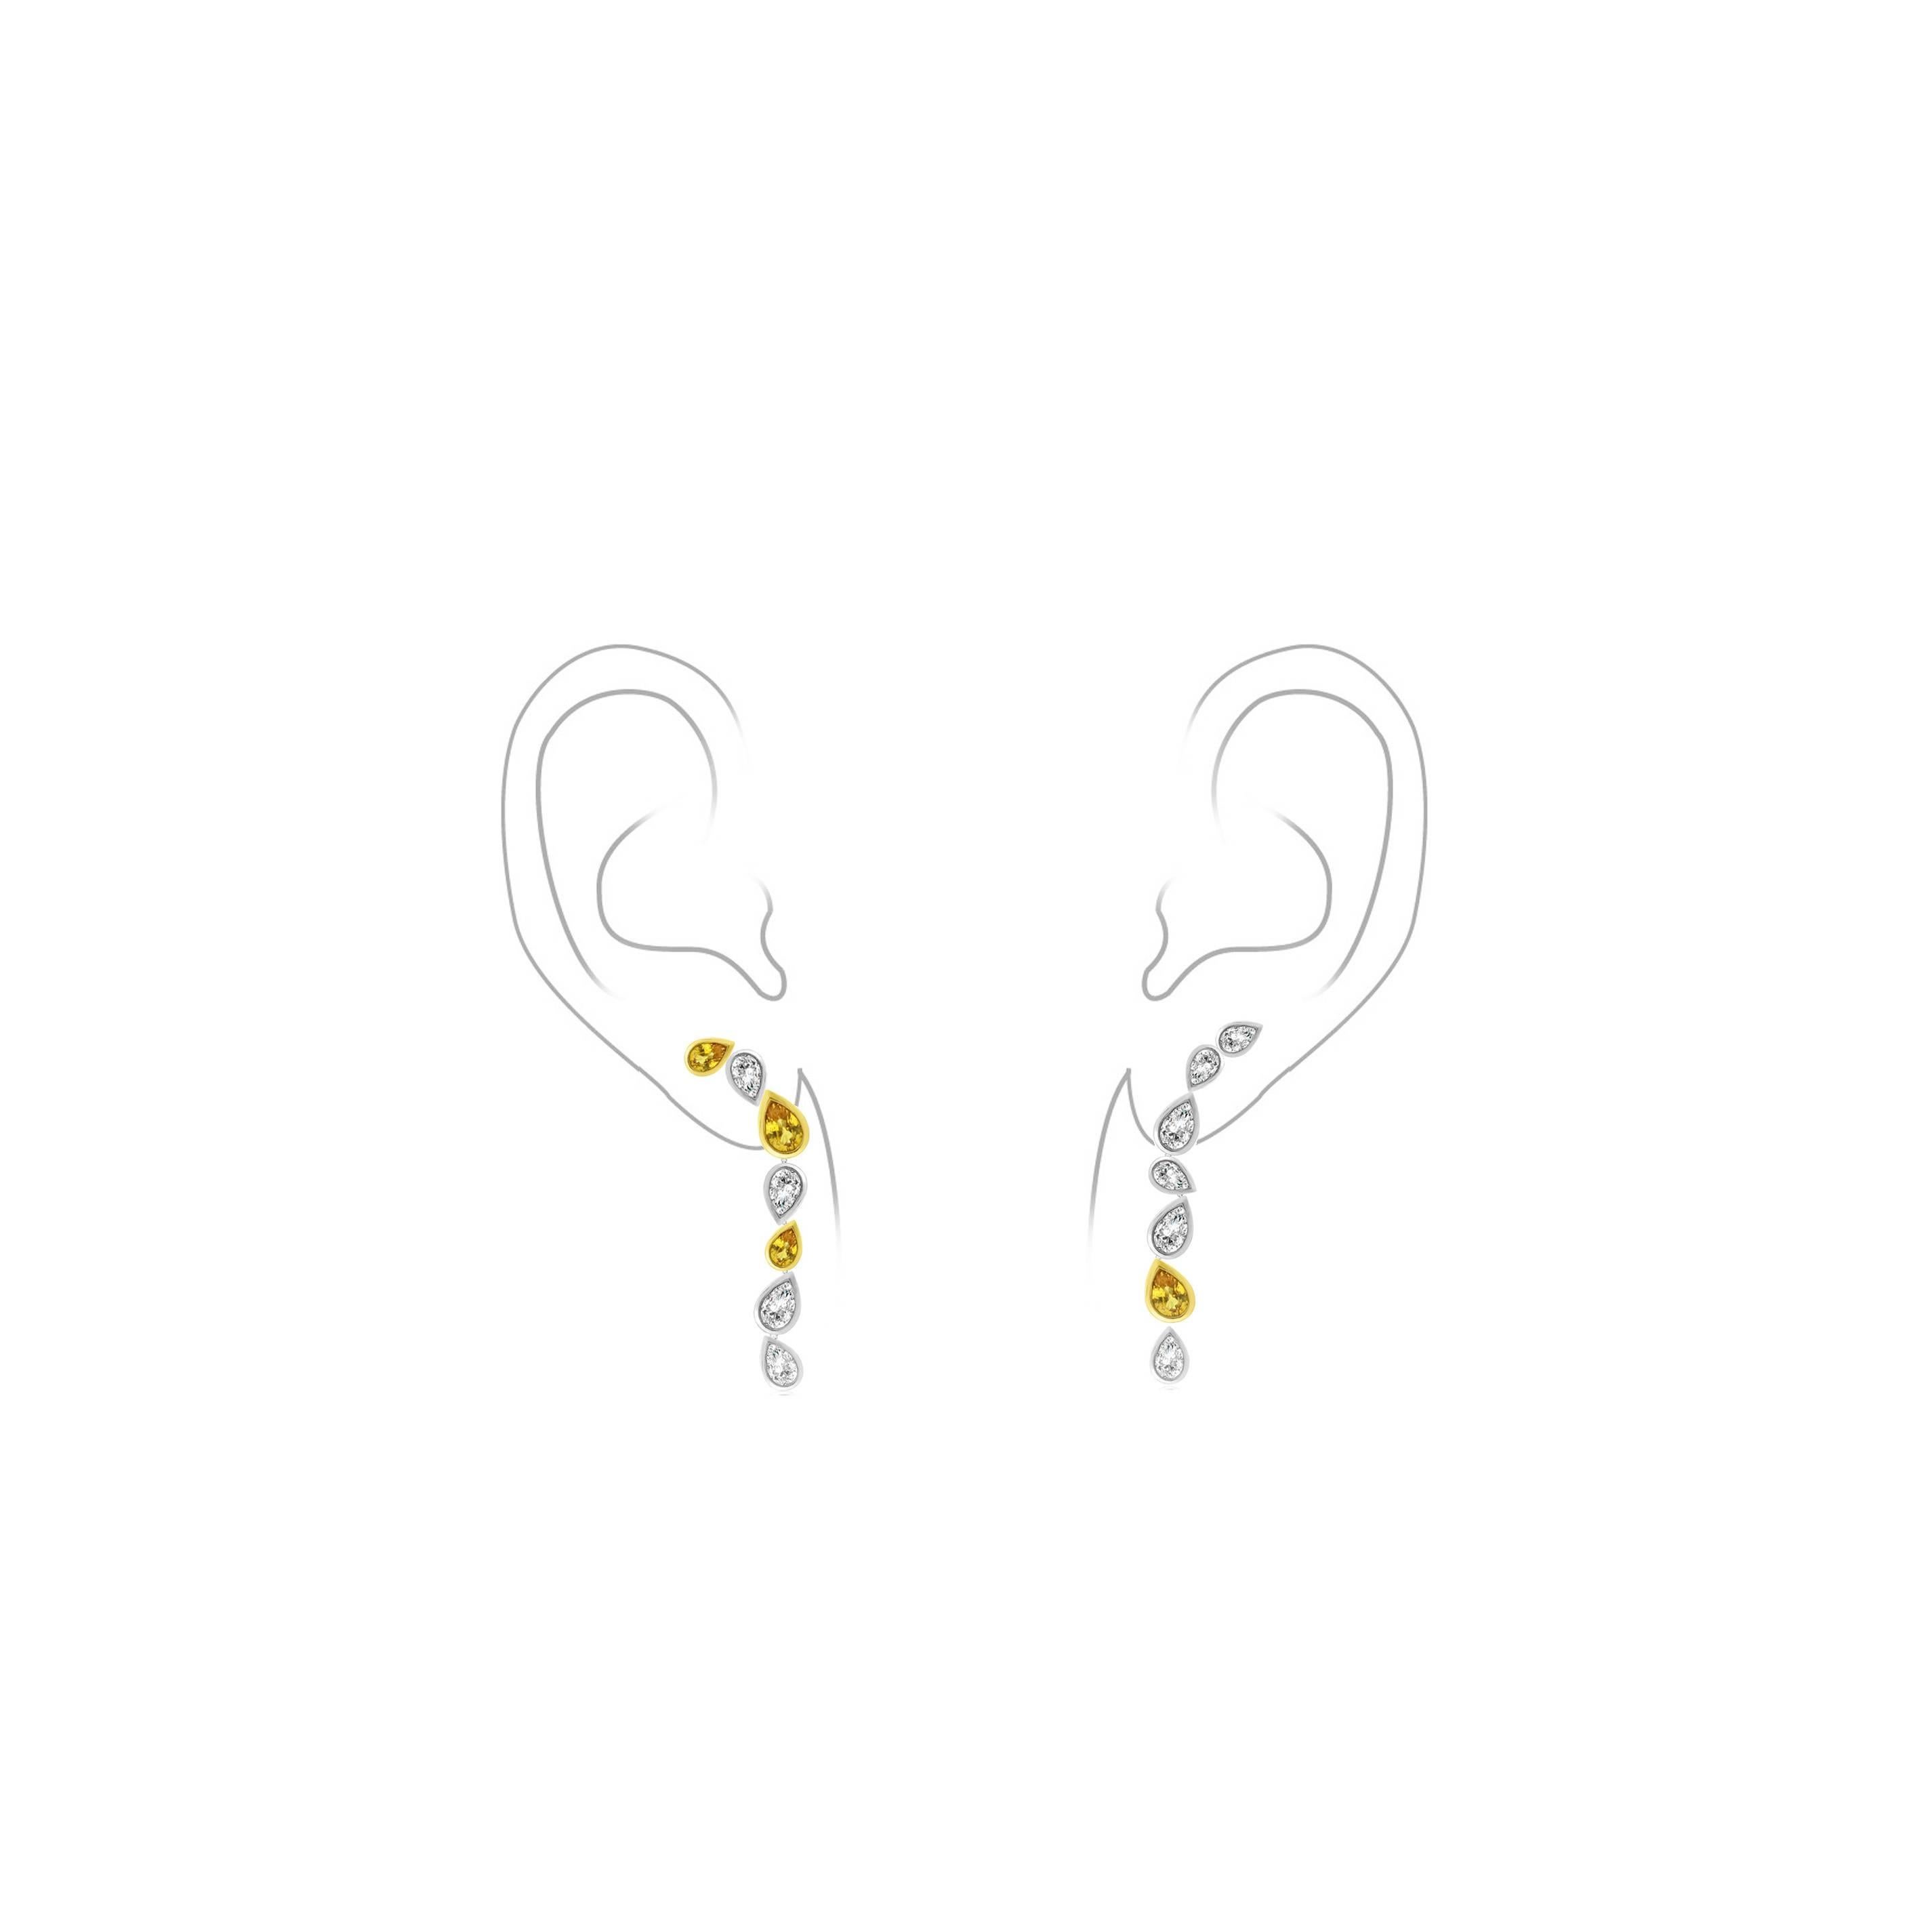 The stated price is the starting price for this piece.
Please don't hesitate to contact us to customise this design to your own specifications.

These earrings have been designed to tilt naturally up the ear lobe, each pear shaped stone in these